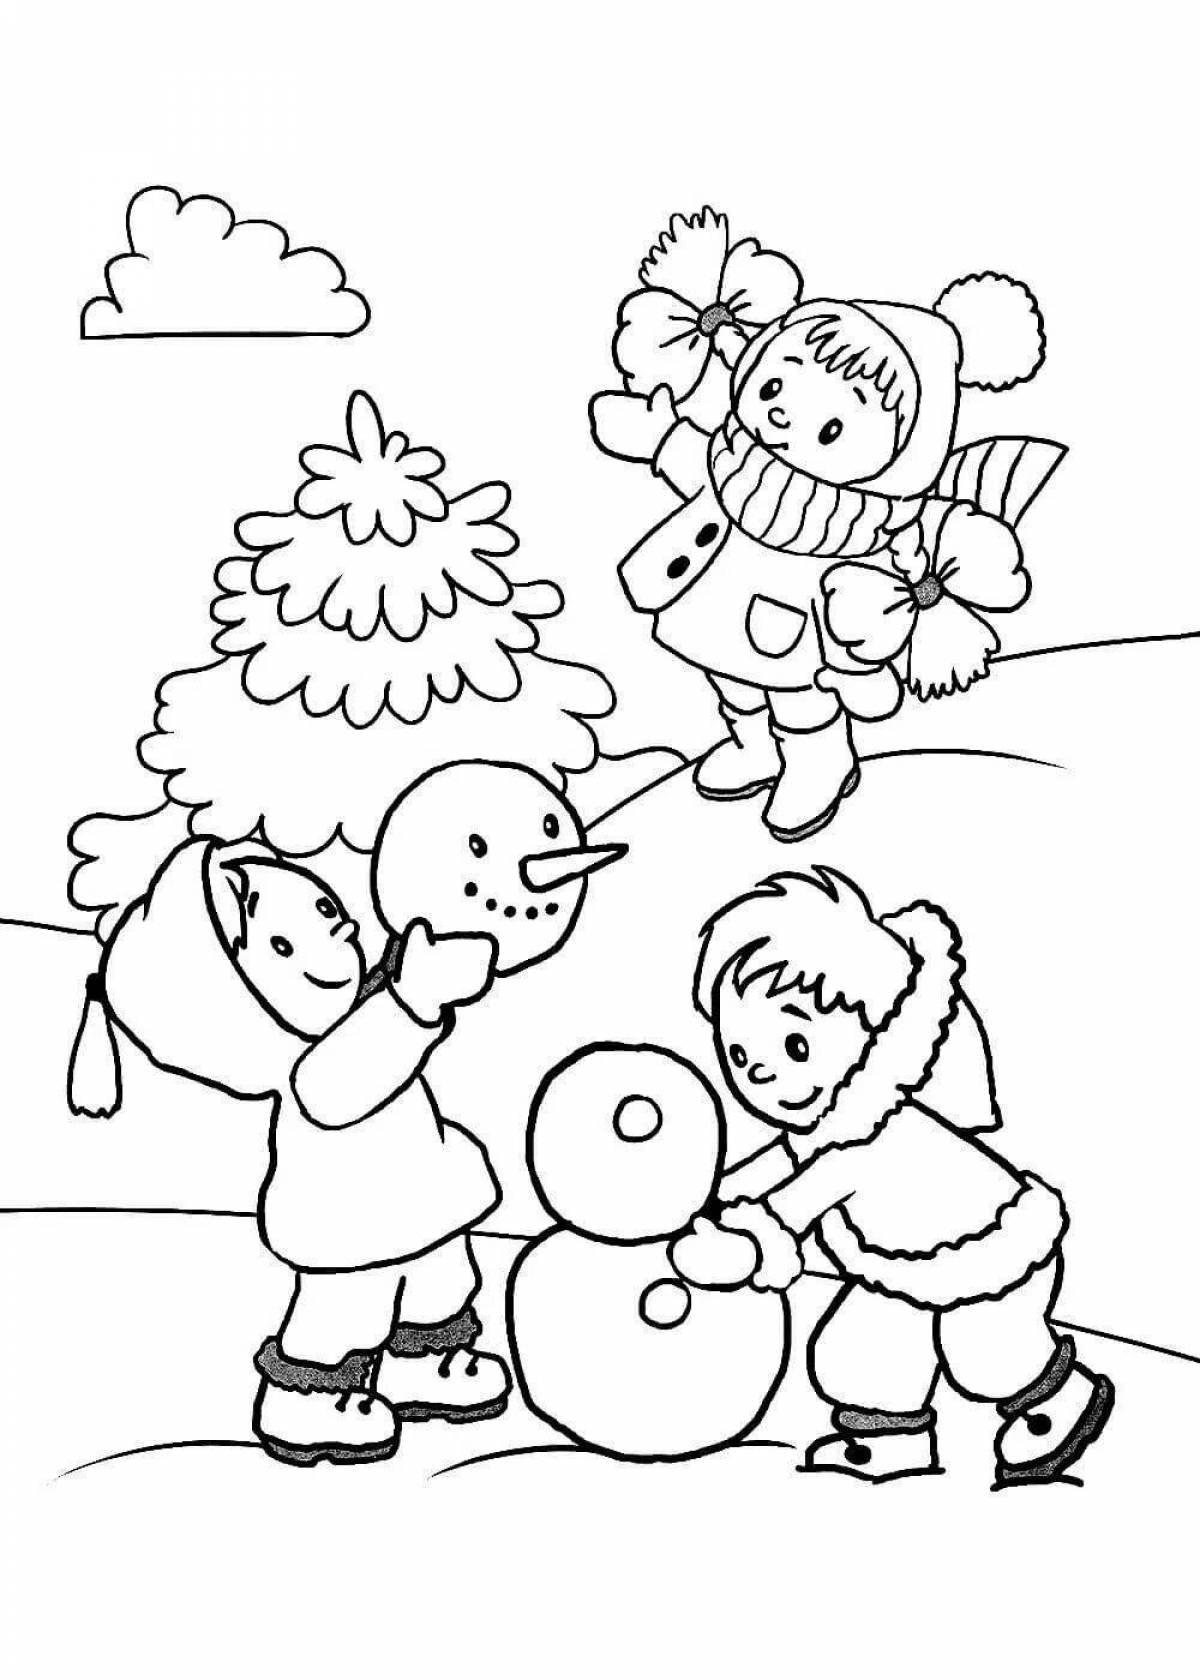 Fantastic winter coloring book for children 6-7 years old